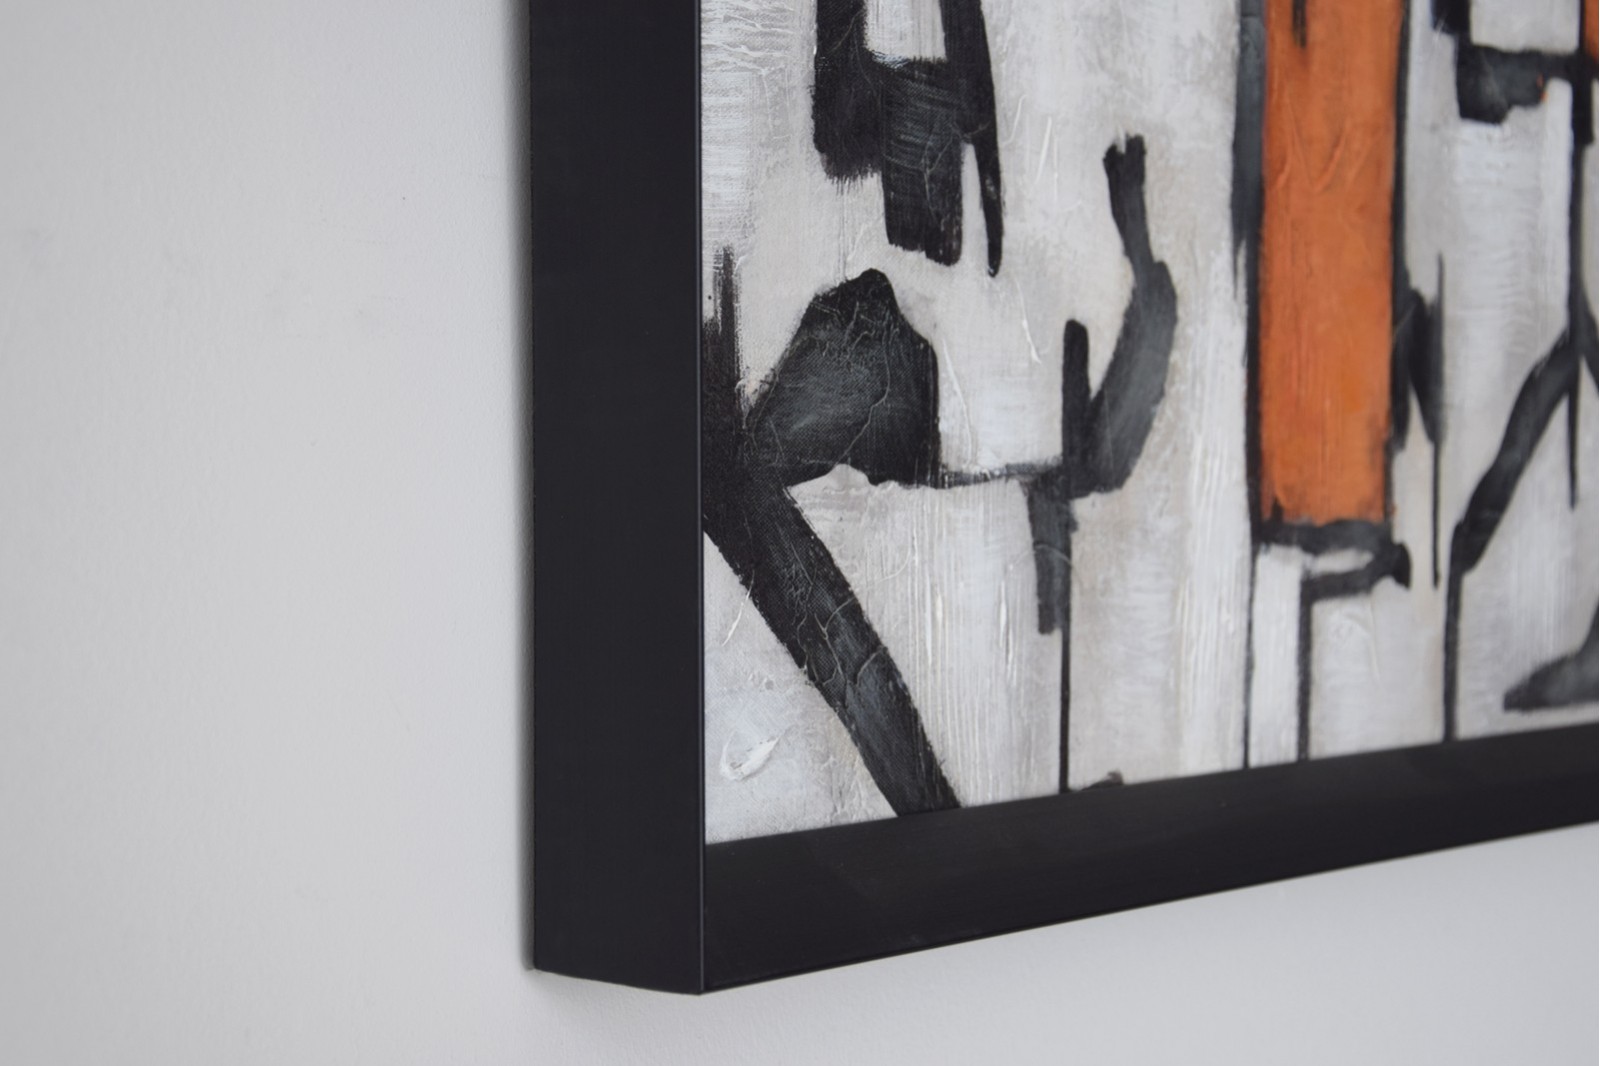 ABSTRACT PAINTING LABYRINTH N1. BLACK FRAME